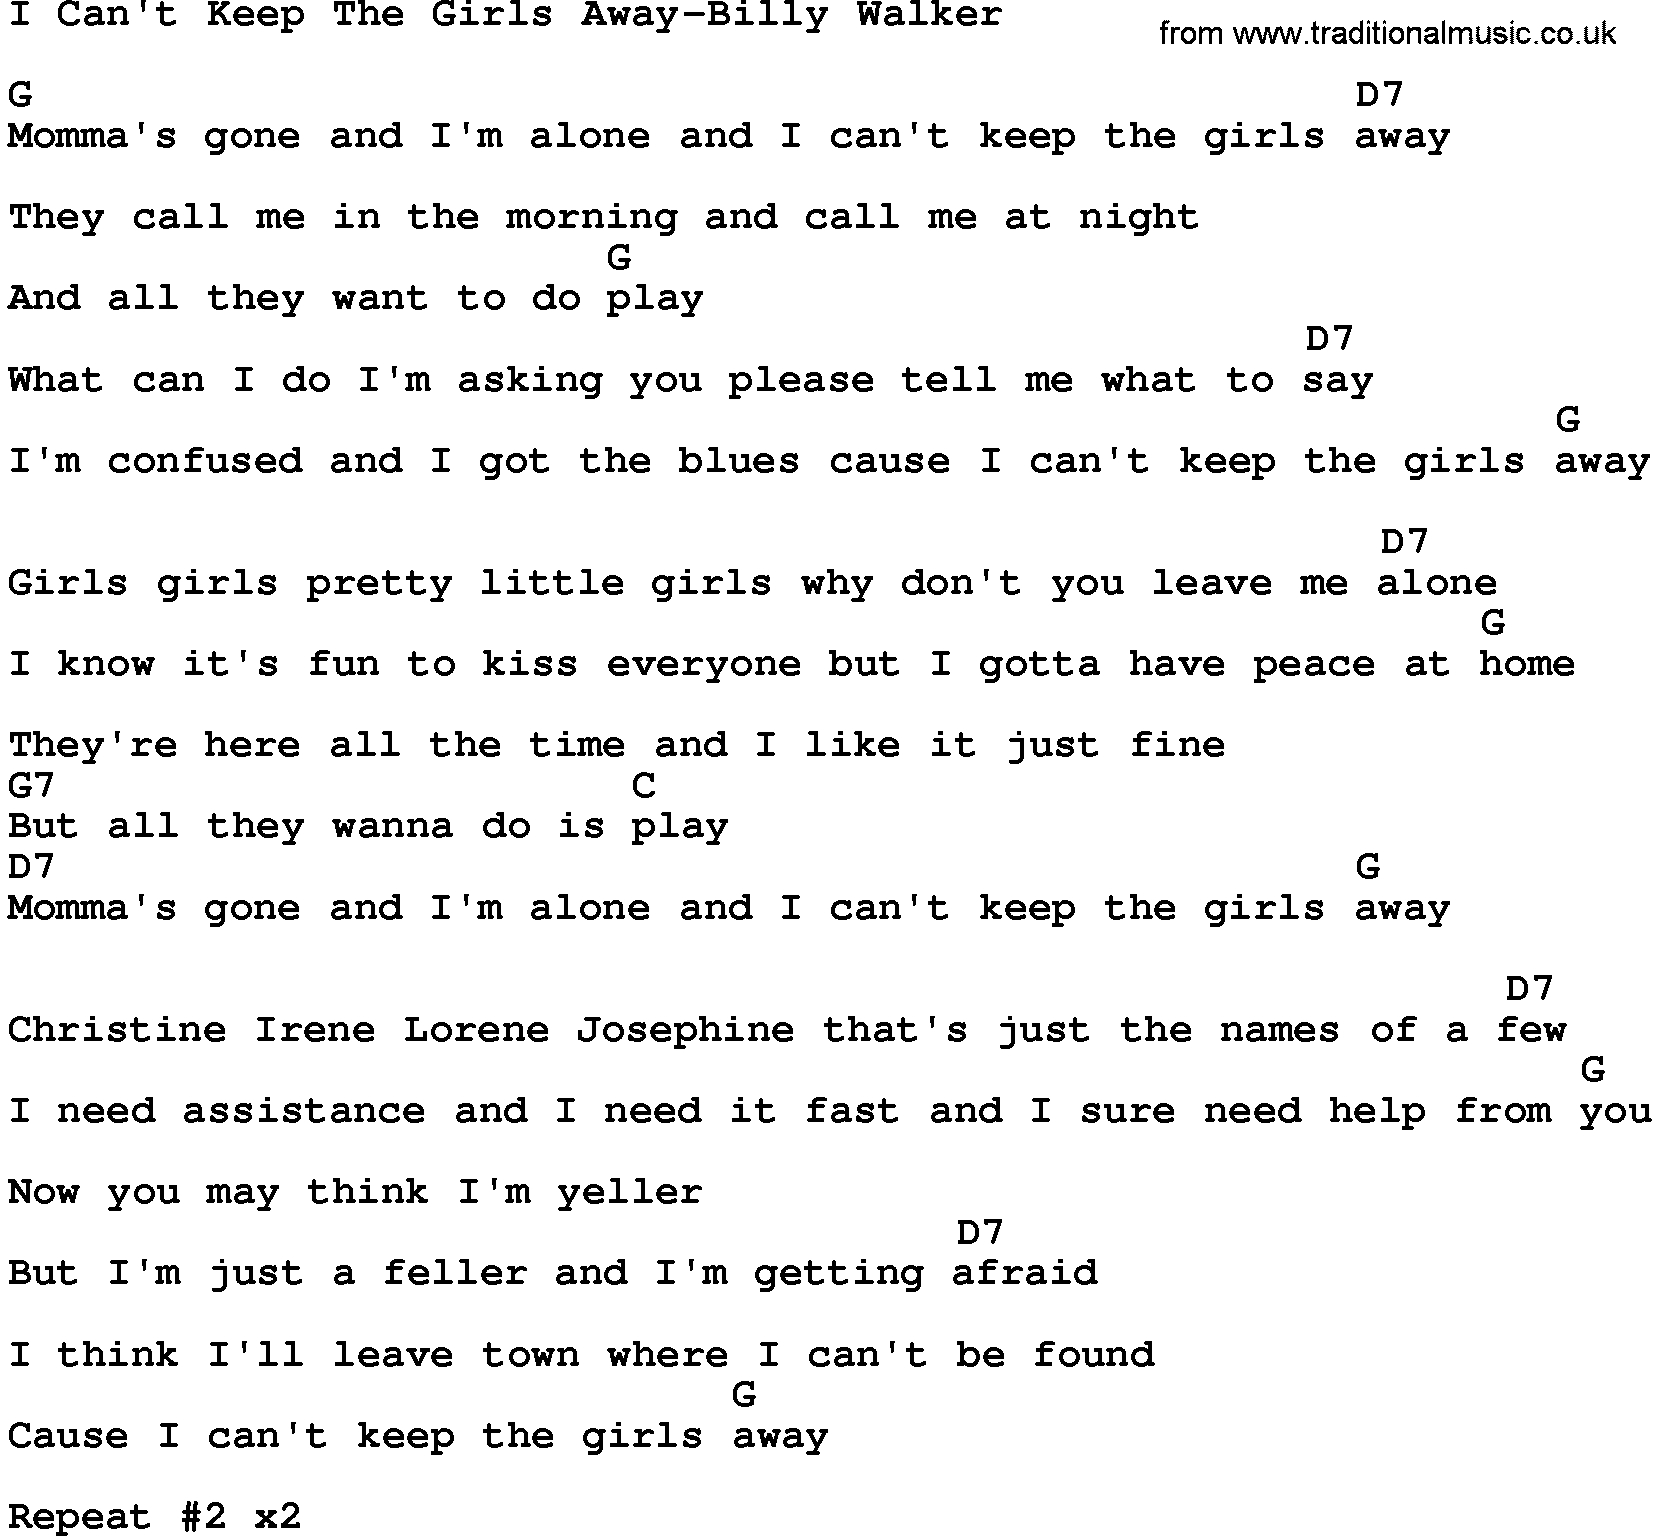 Country music song: I Can't Keep The Girls Away-Billy Walker lyrics and chords